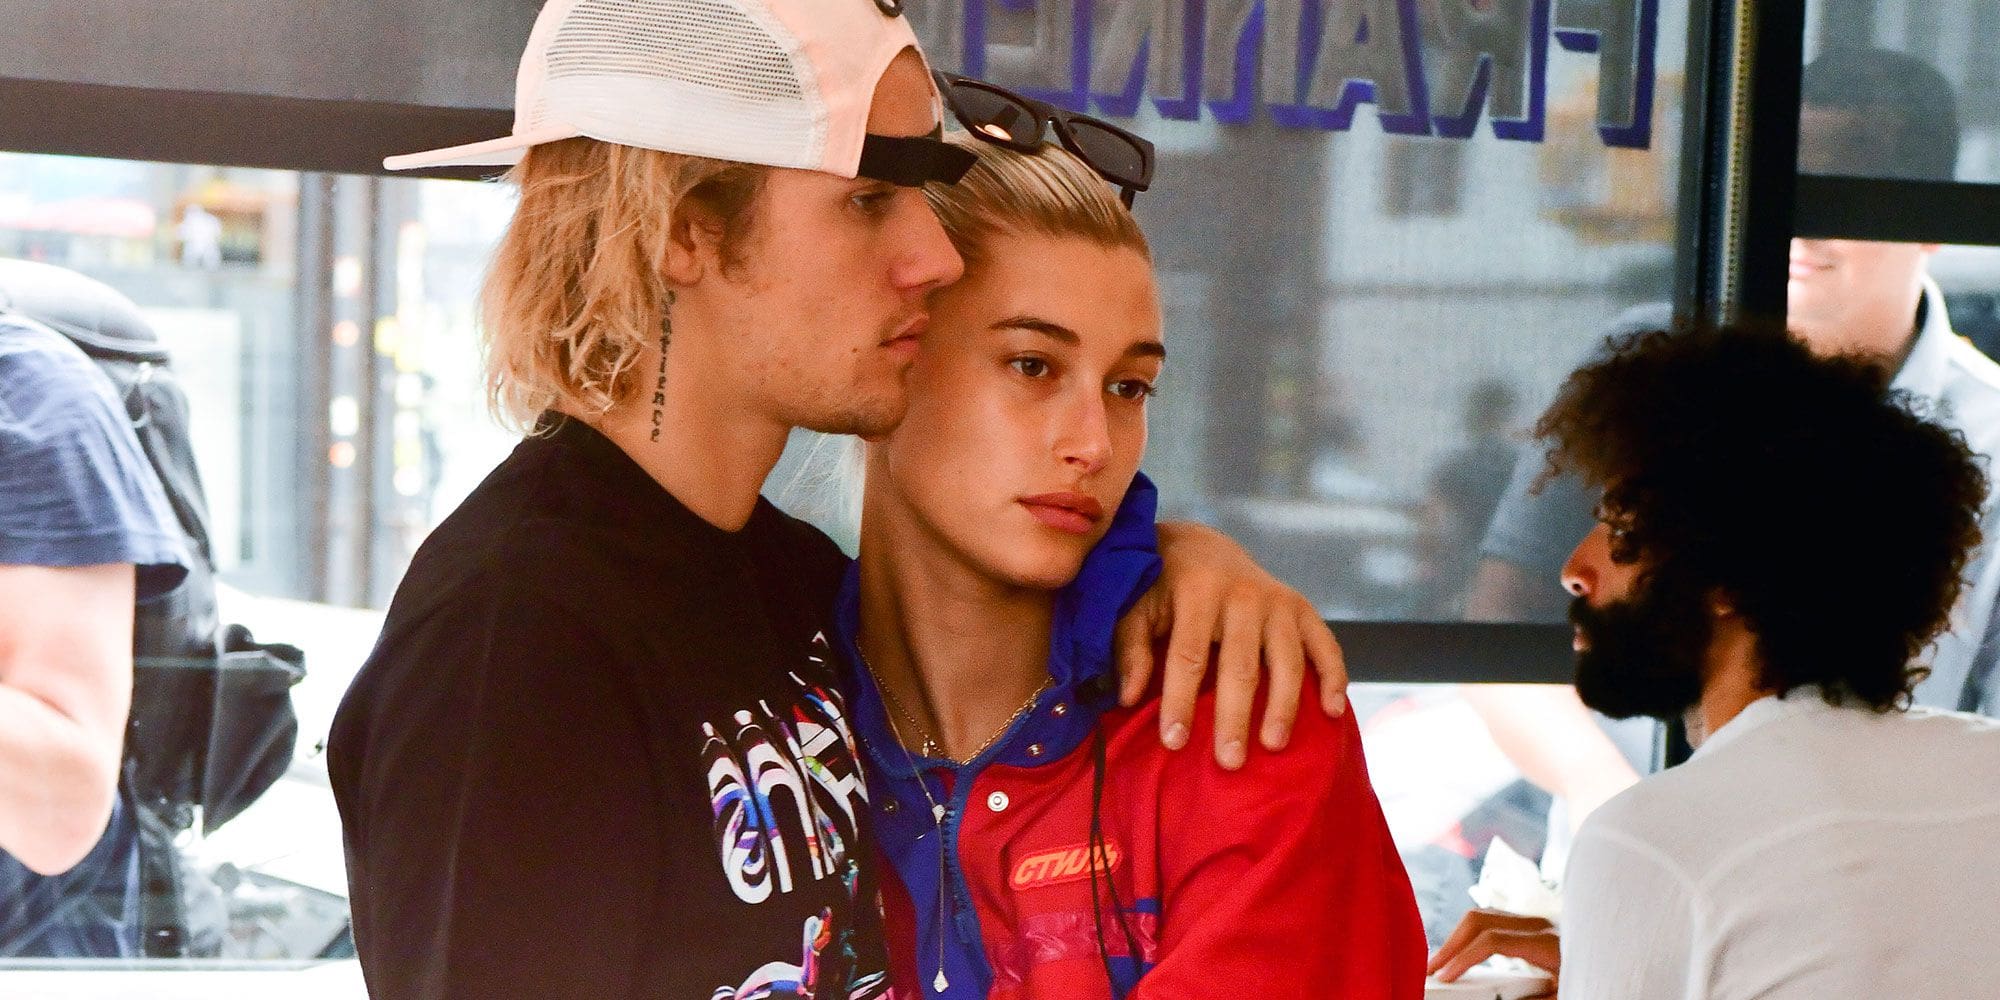 Justin and Hailey